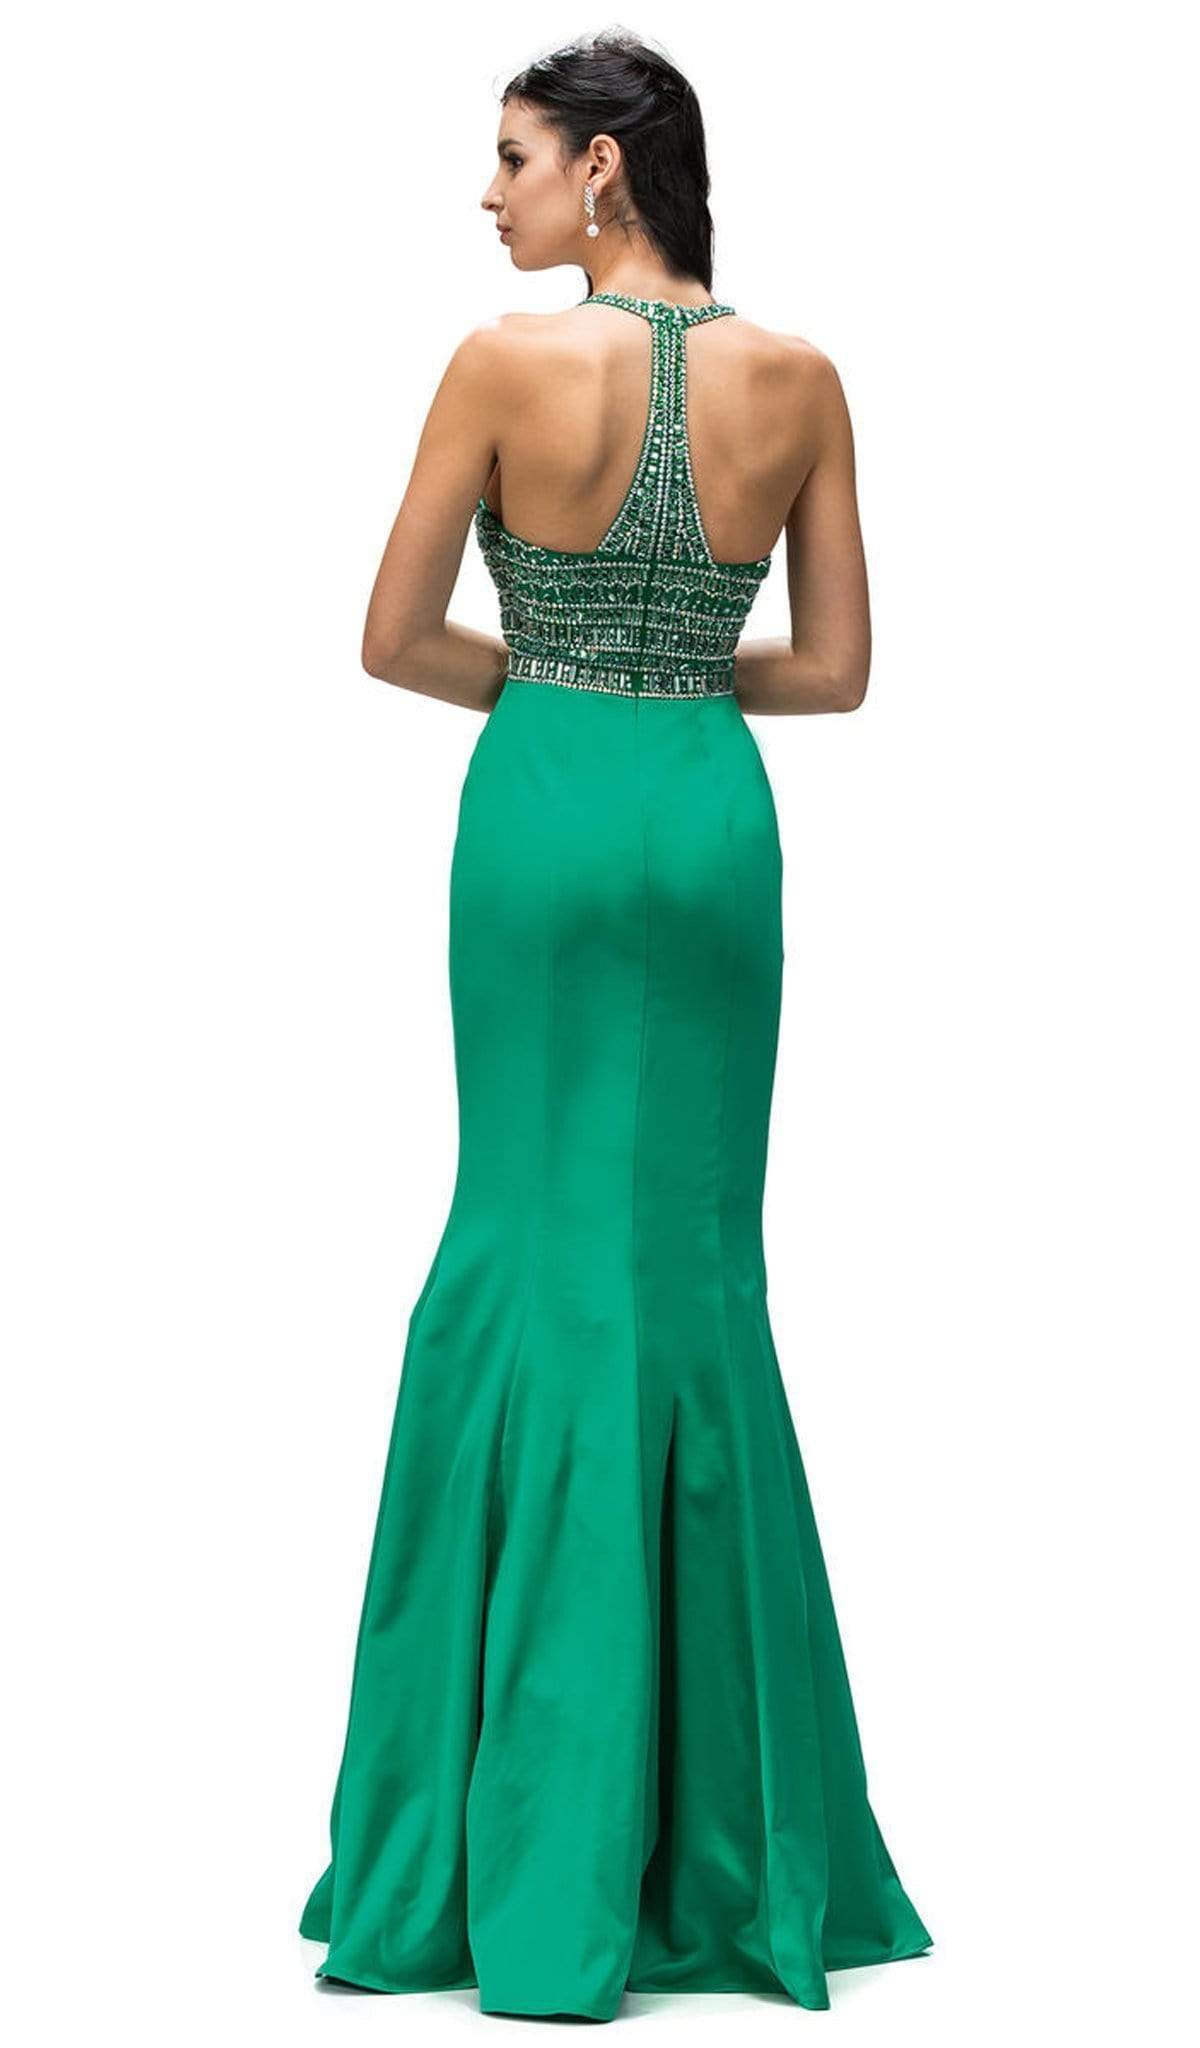 Dancing Queen - 9355 Sparkly Sequined Halter Style Evening Gown Special Occasion Dress XS / Green